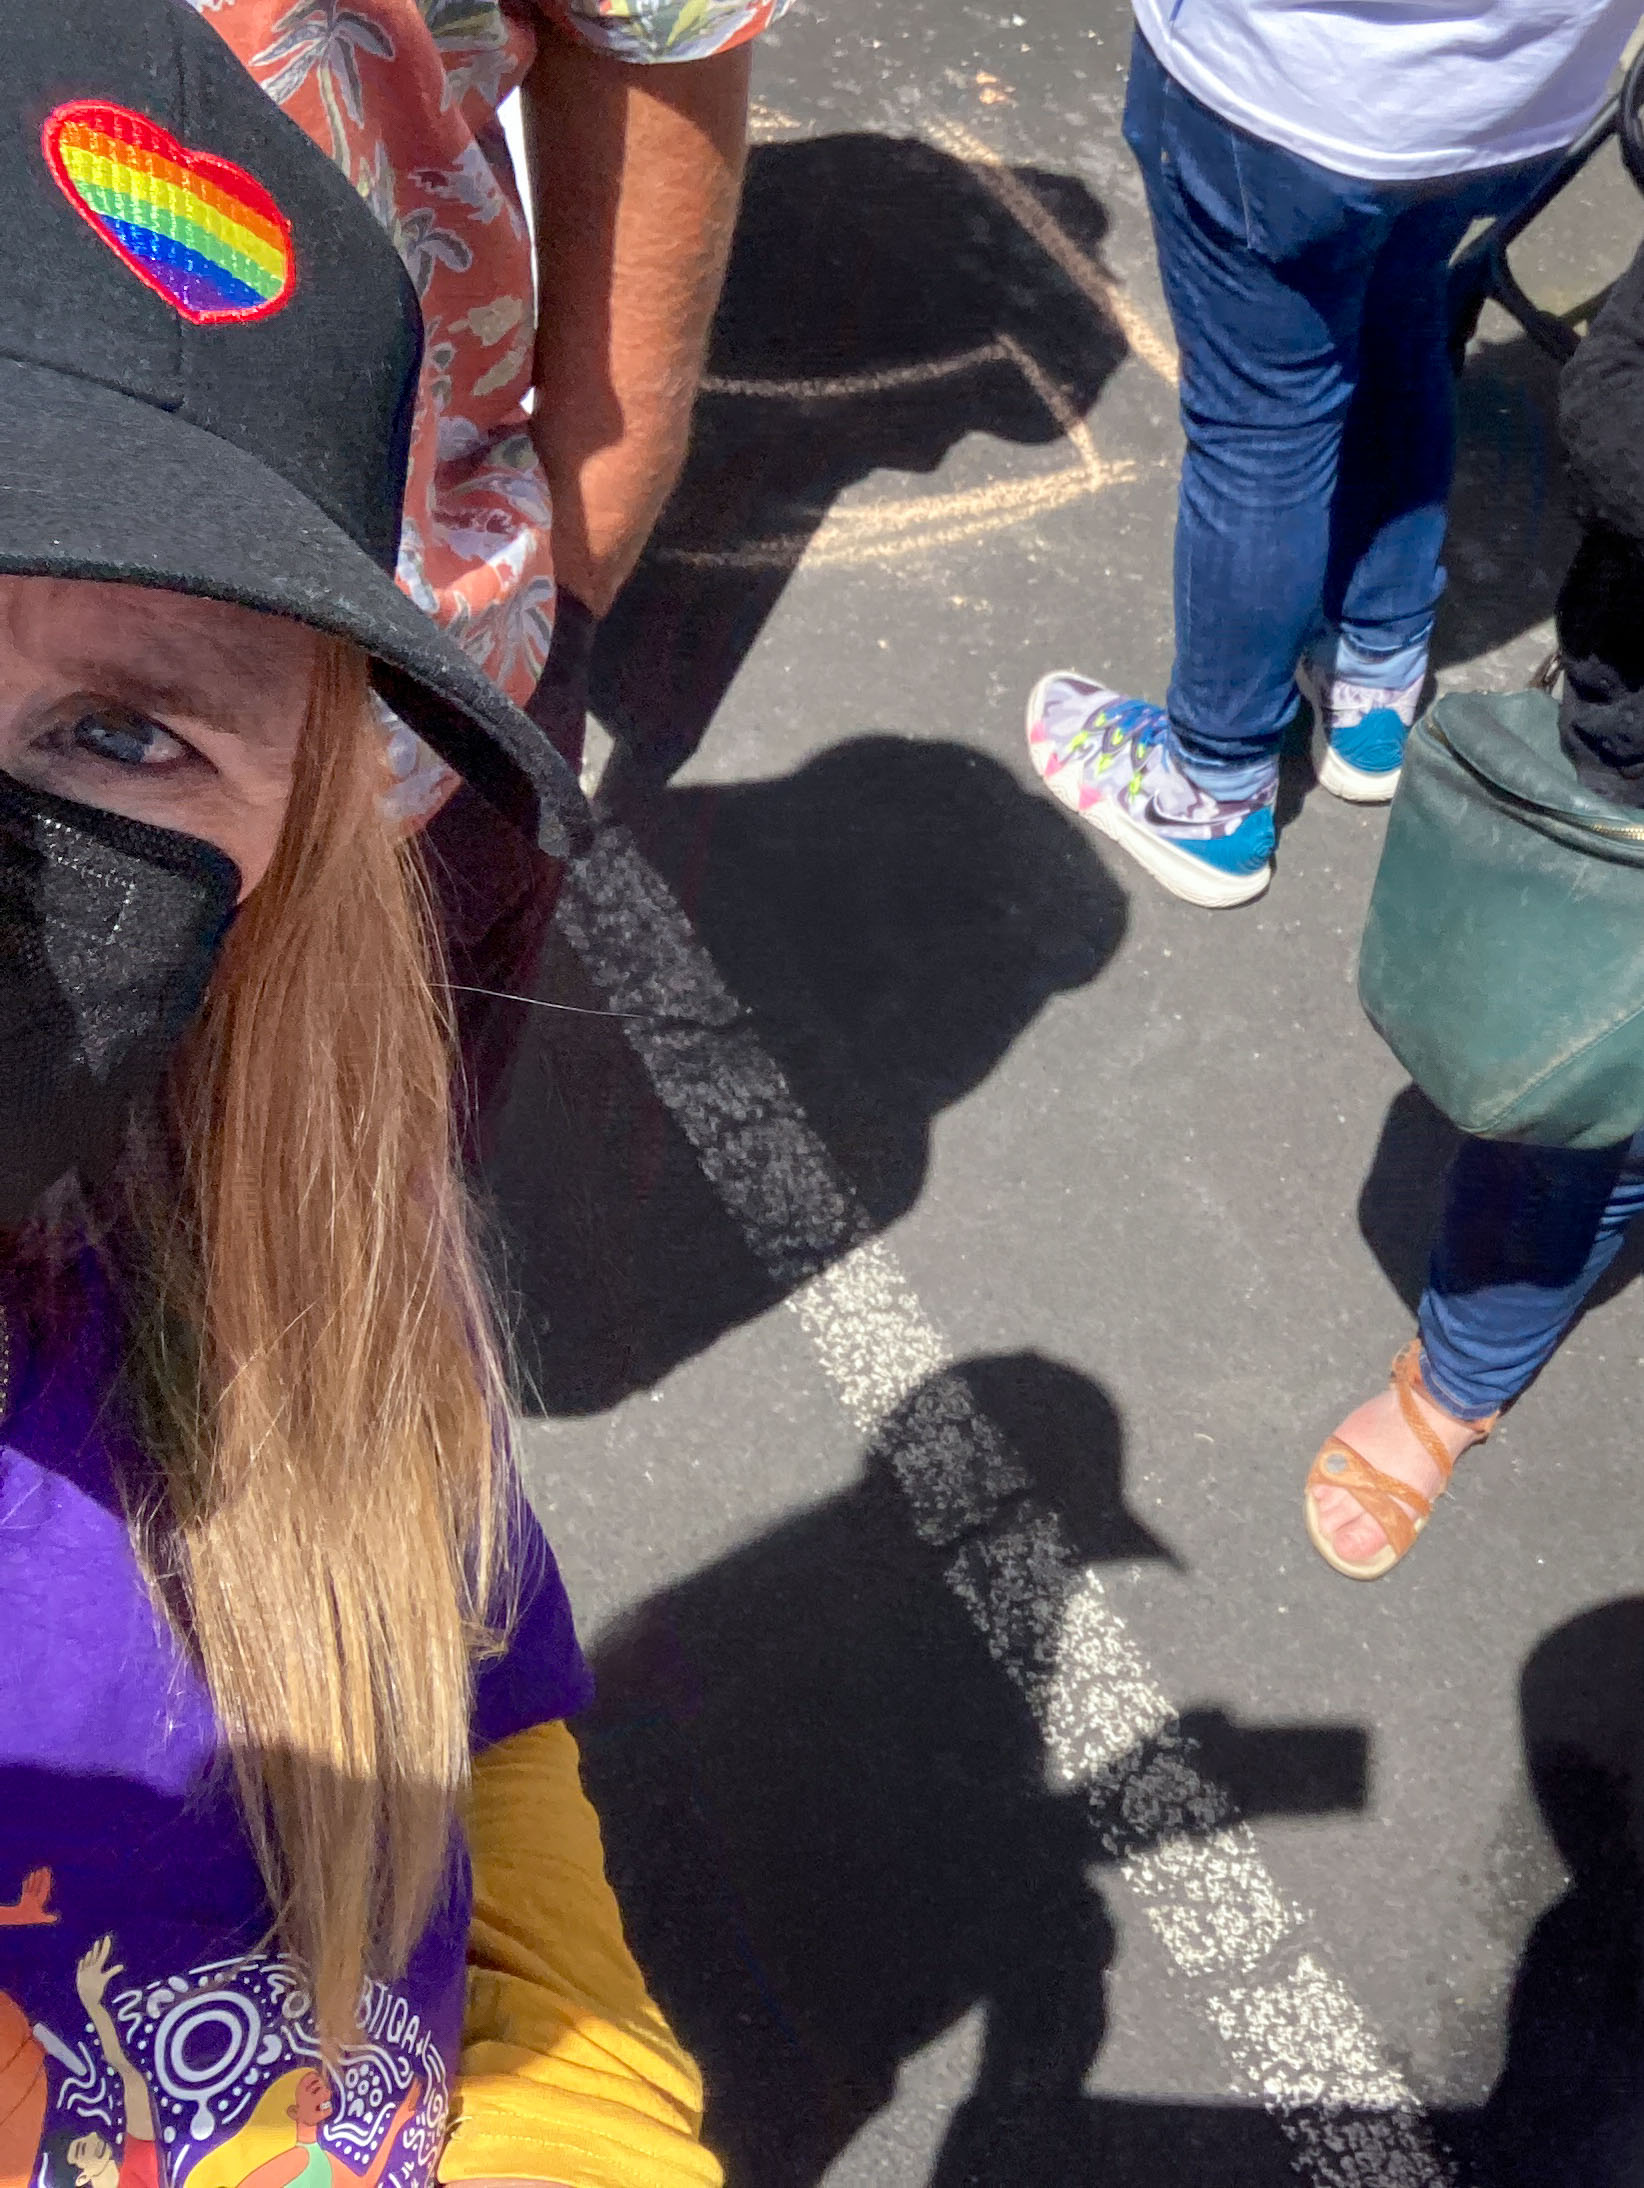 Barb is cut out of most of this photo, half of her is on the left side, she is wearing a cap with a rainbow heart, a black mask and a purple shirt